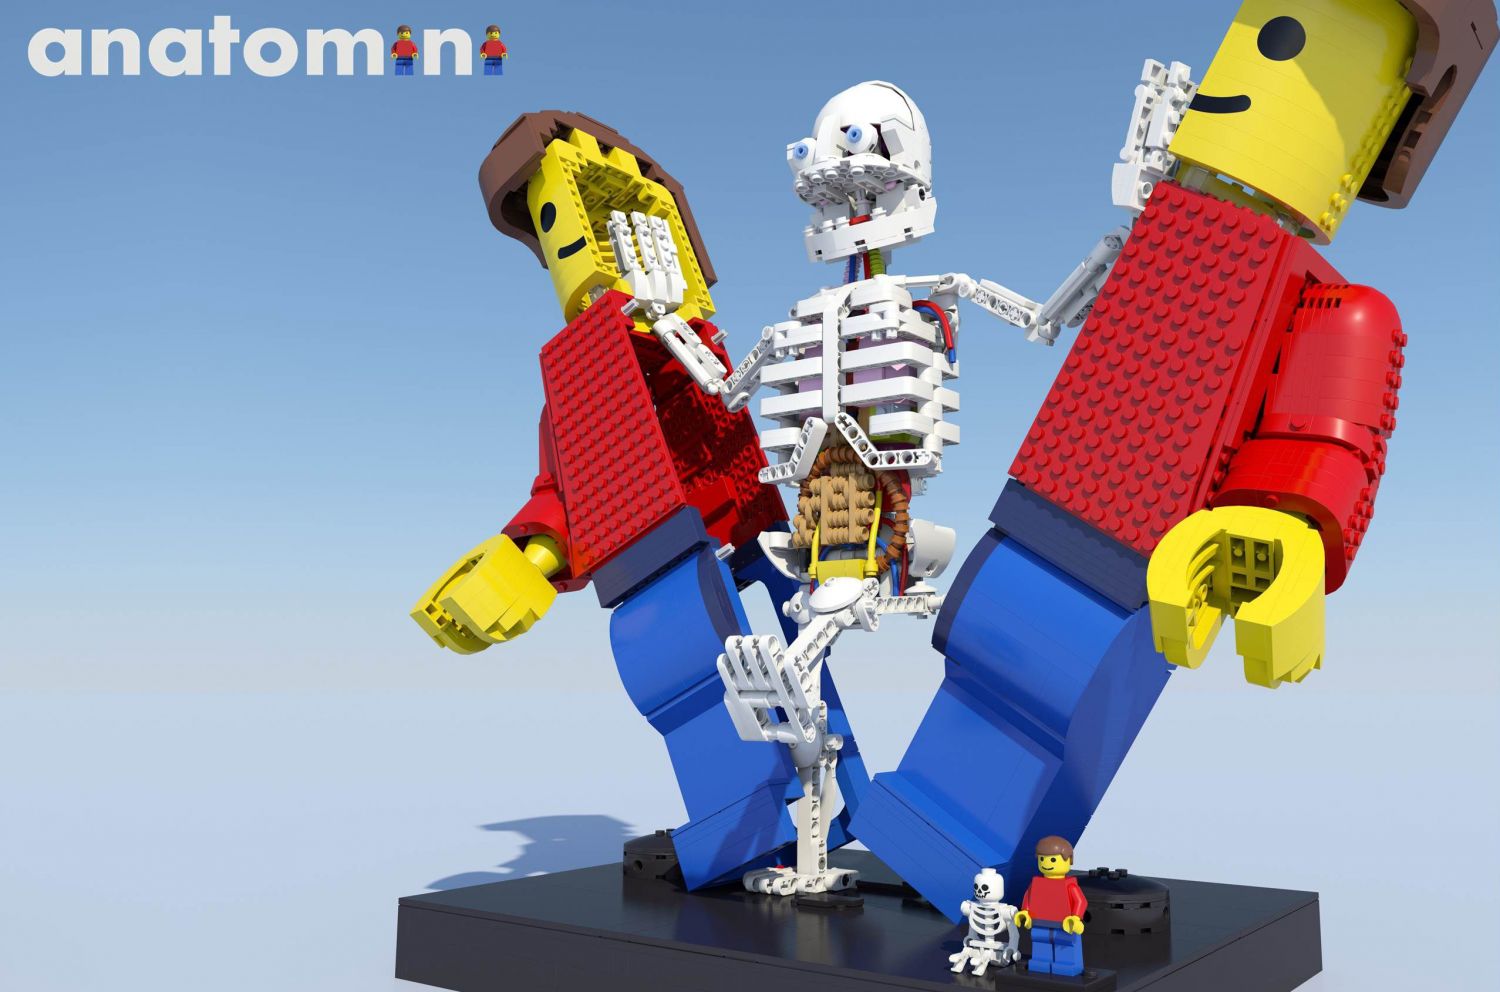 rejected-lego-ideas-projects-will-live-on-via-bricklink-designer-program-in-2021-geek-culture